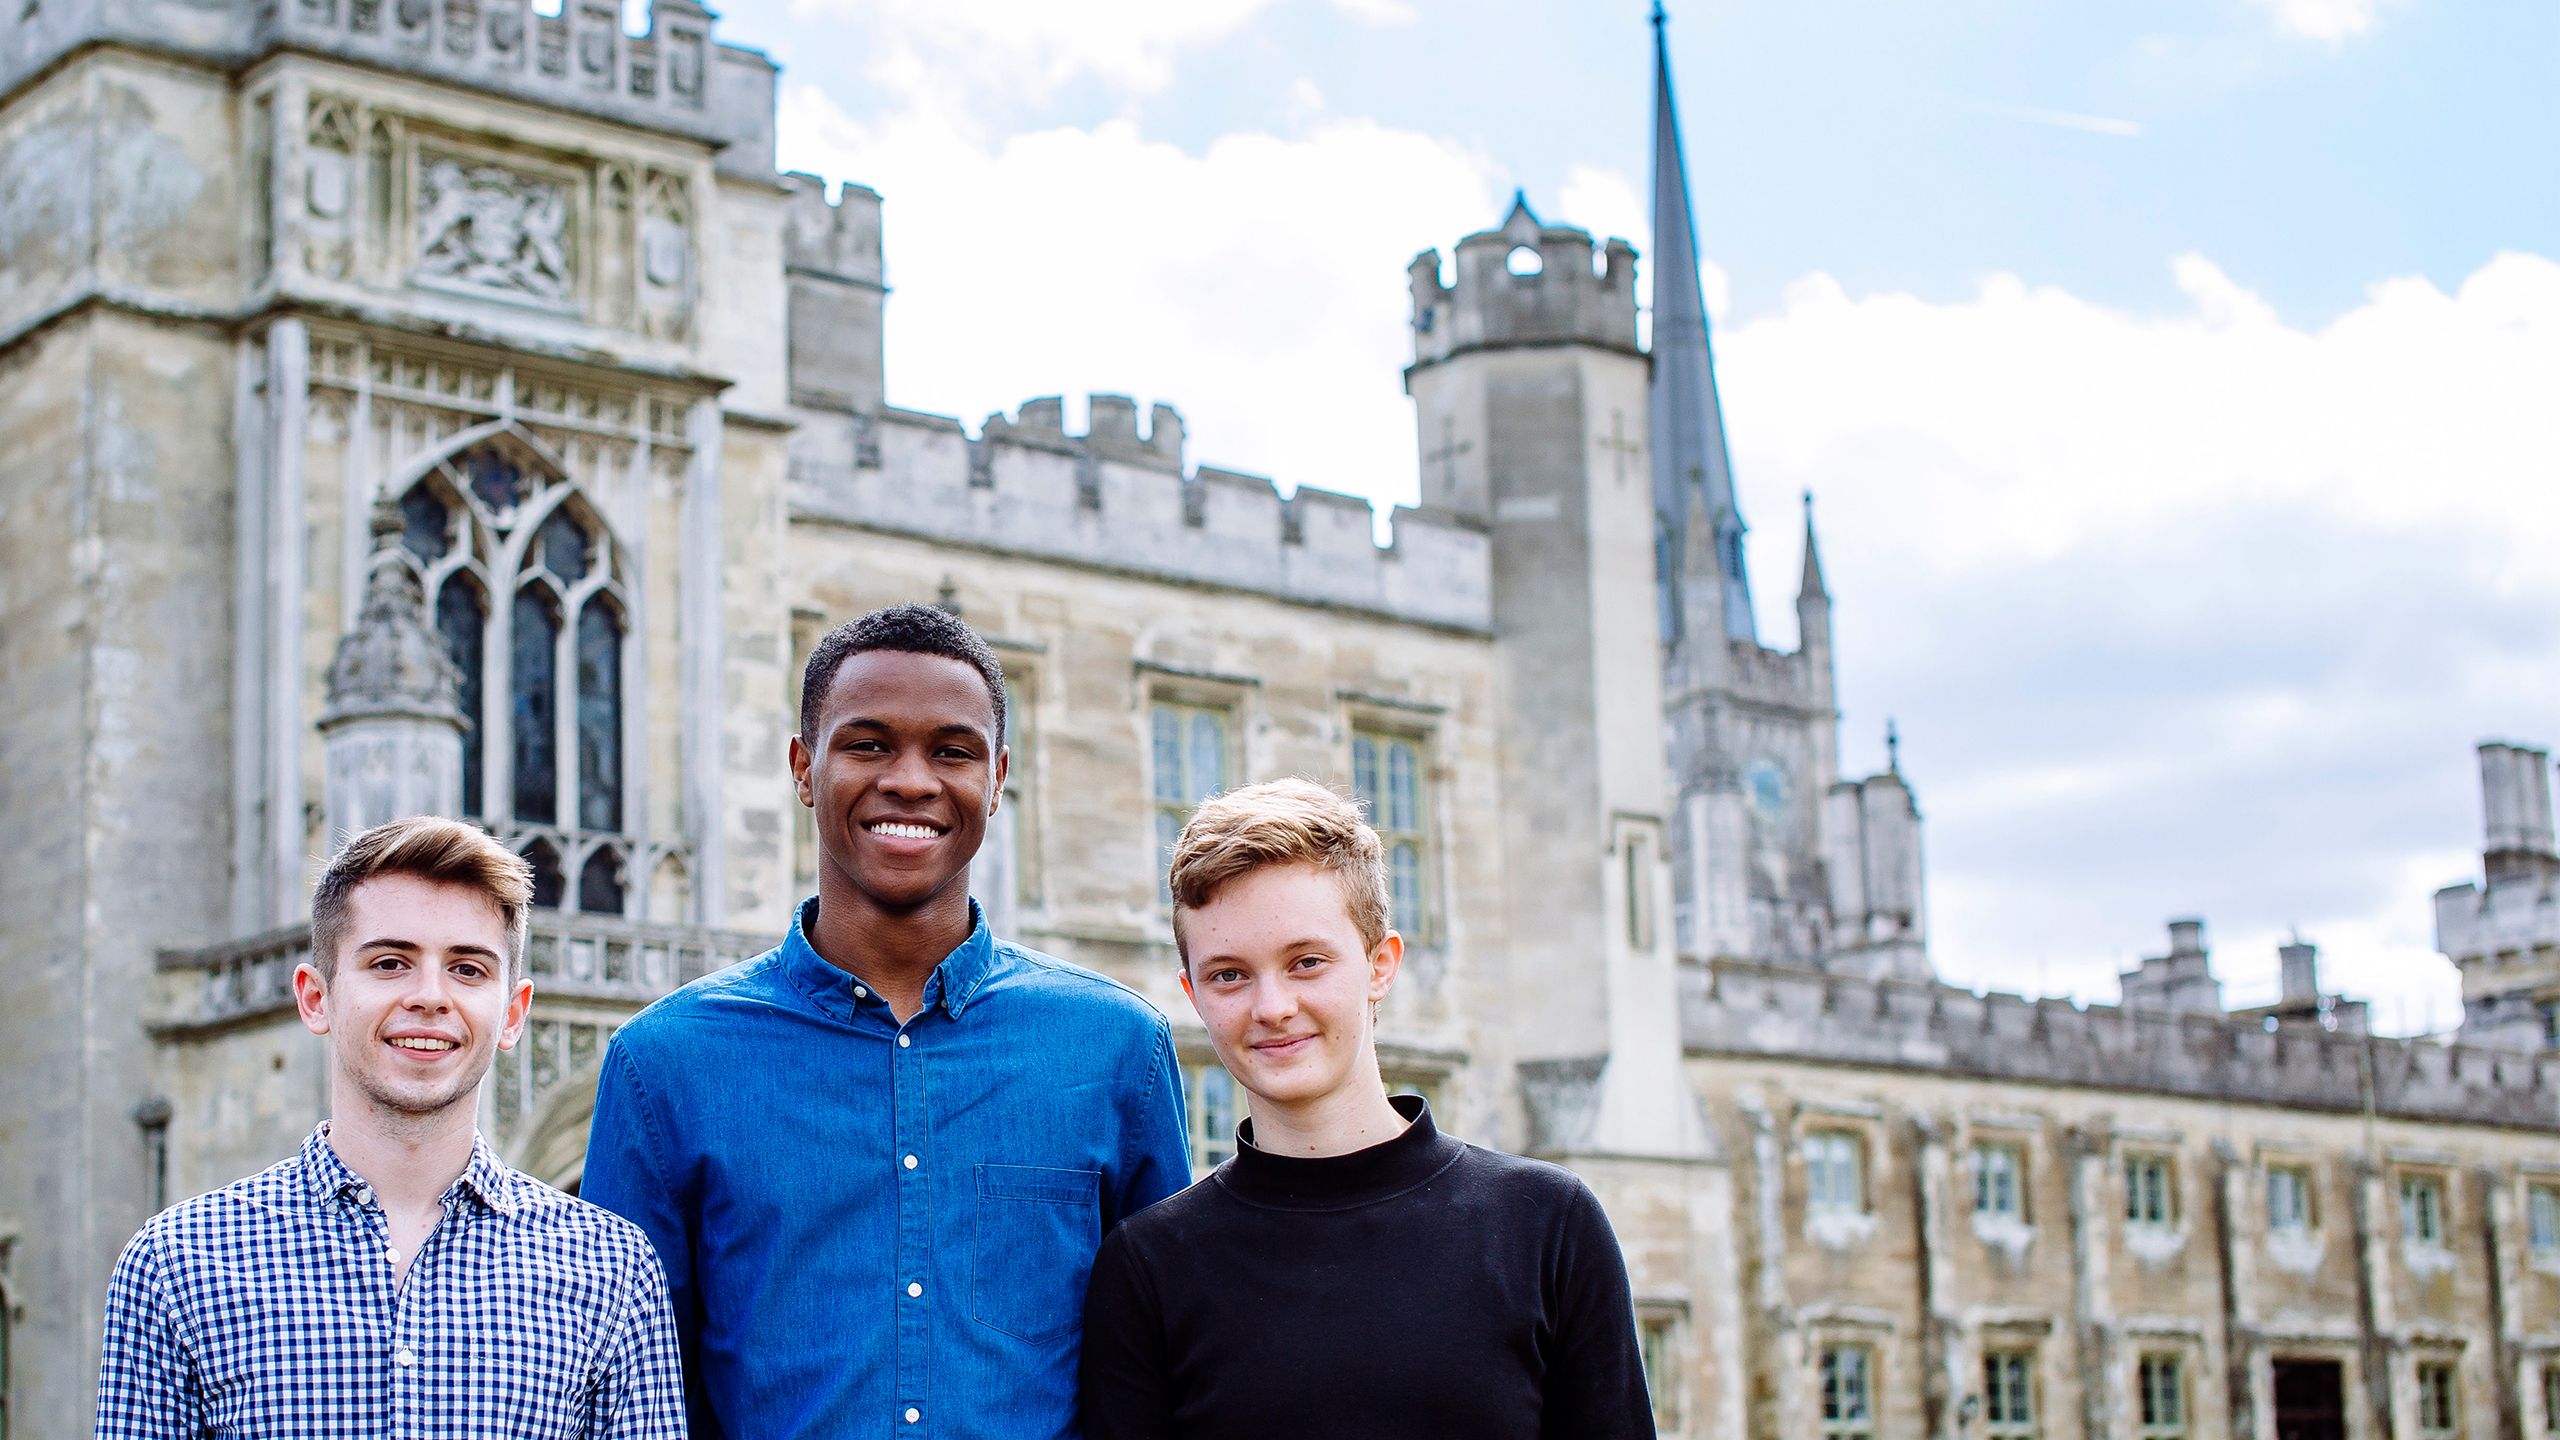 Emory students Kieren Helmn, Ryan James and Jesse Rosen-Gooding pose outside of the English castle where they are competing in the Hult Prize Accelerator.